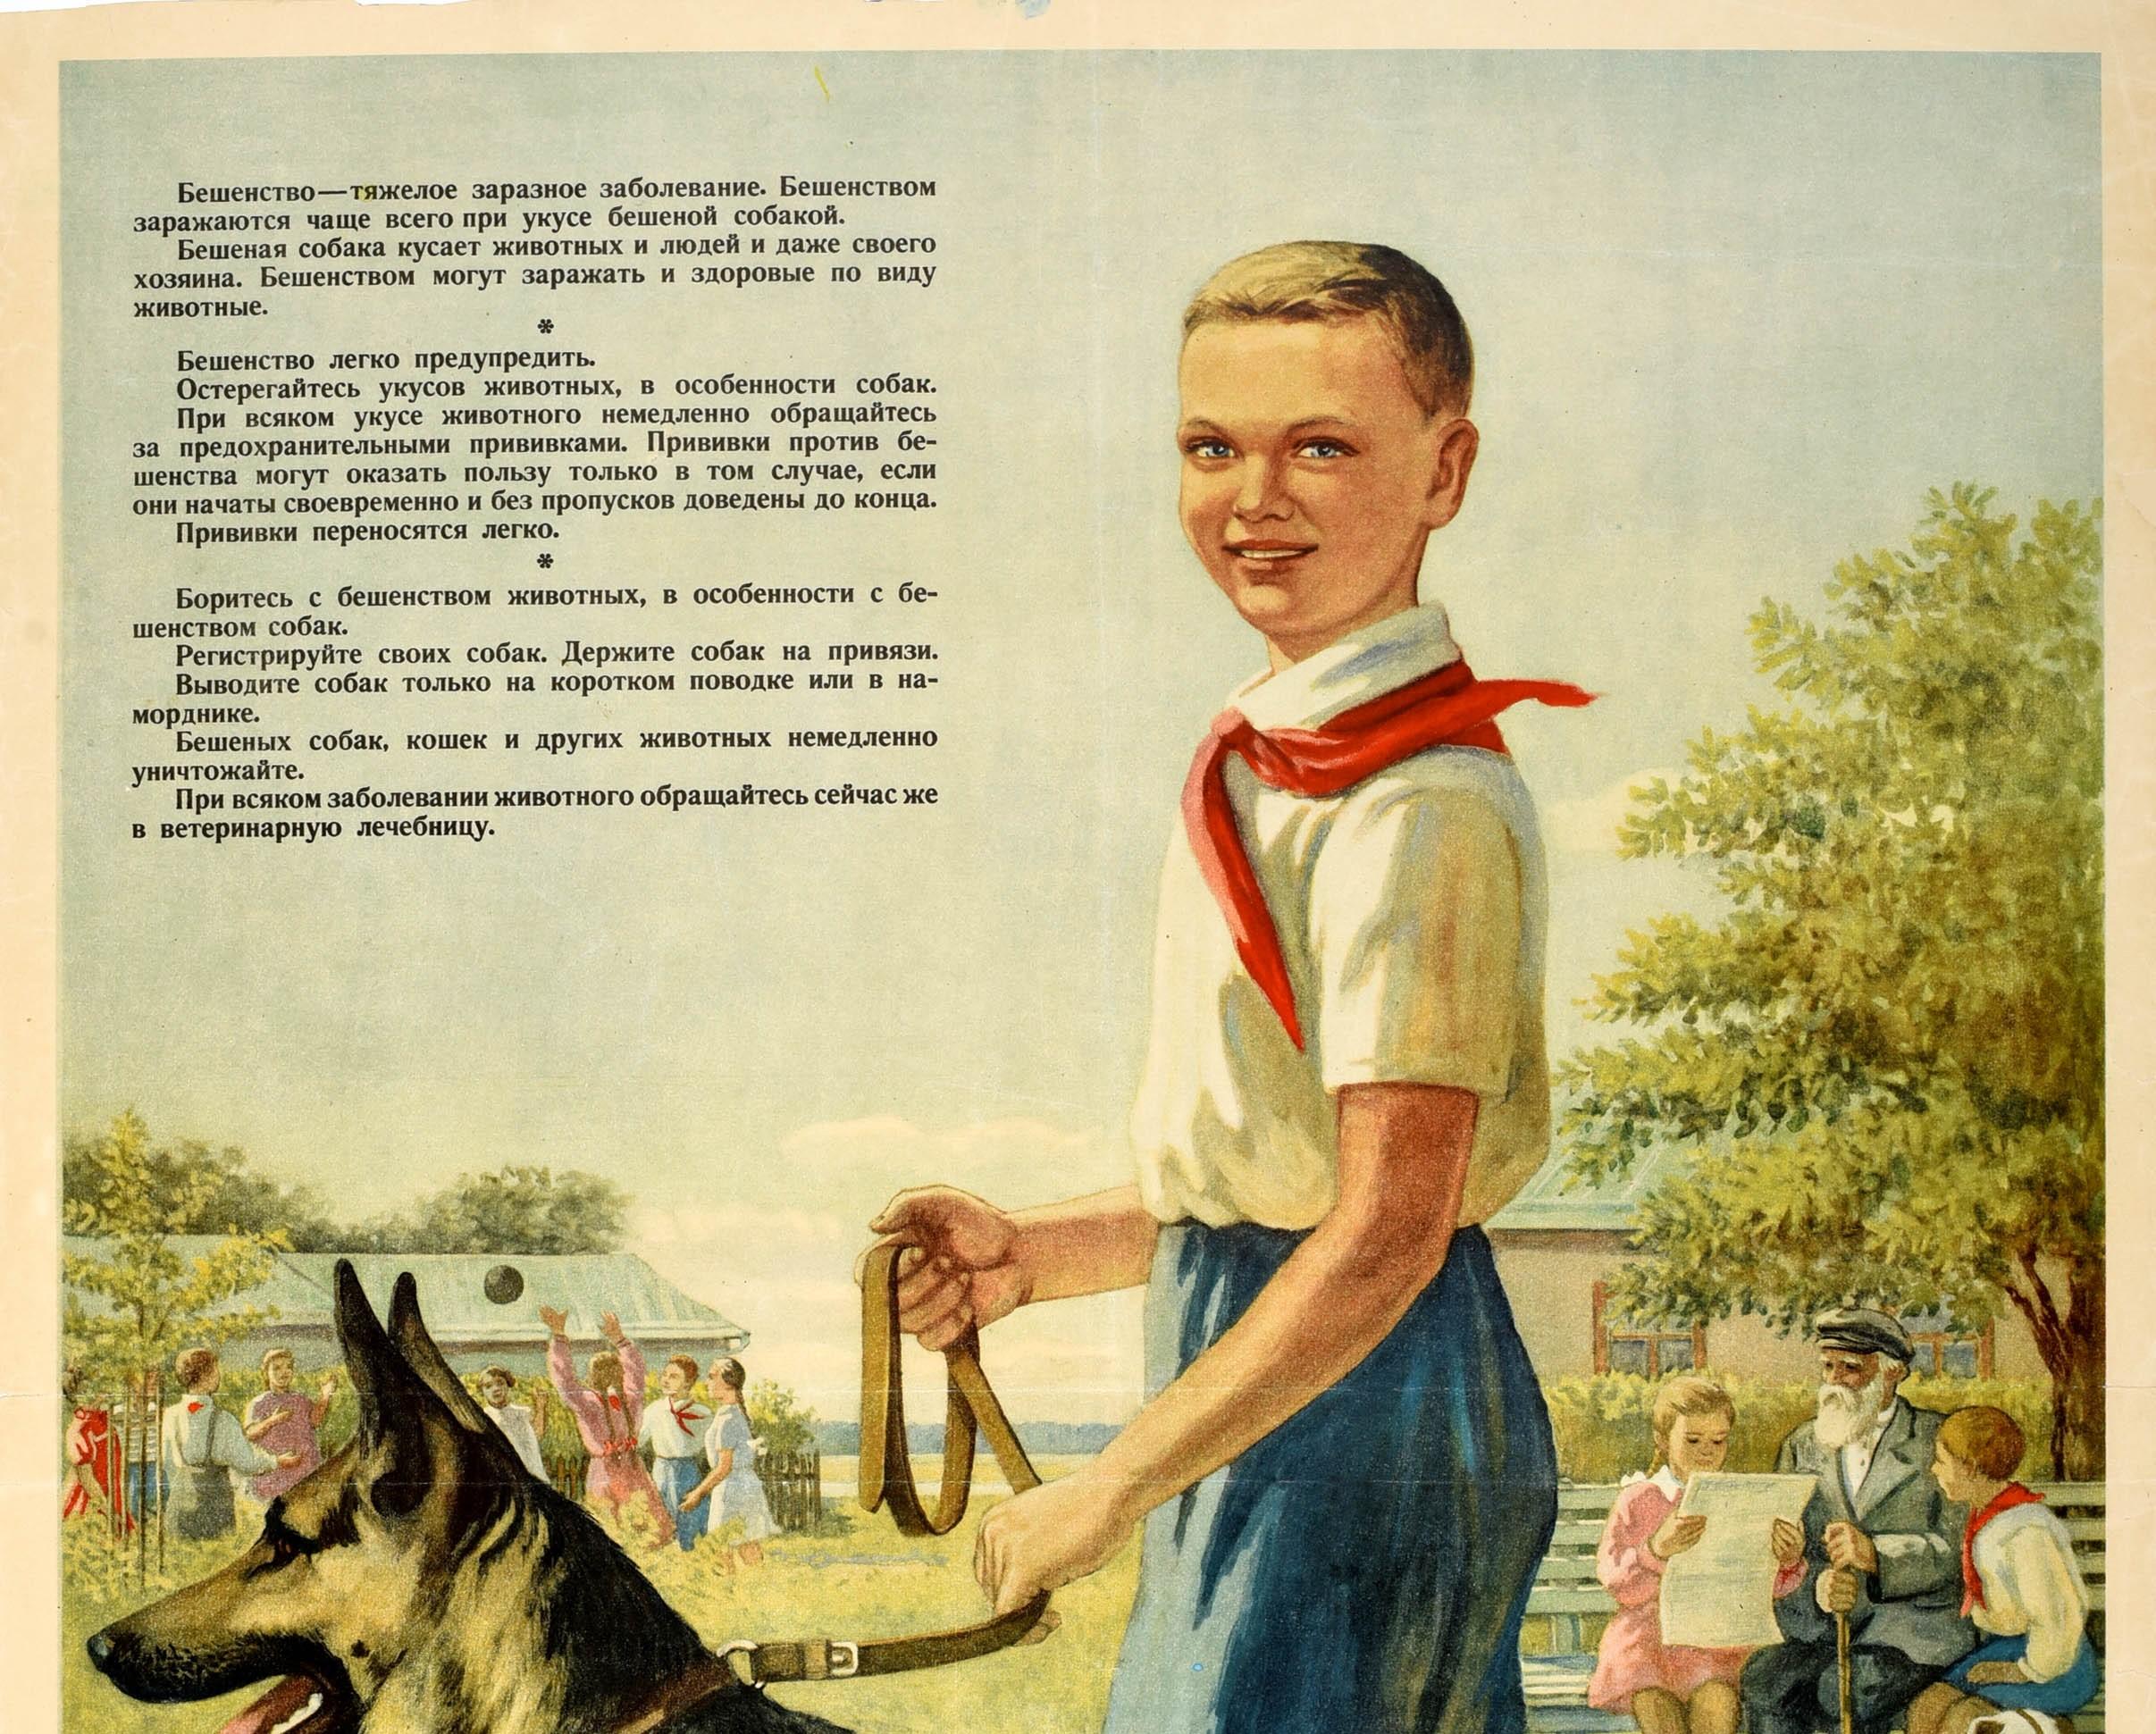 Original vintage Soviet public health poster for the prevention of rabies / ????????? in dogs featuring a freaky looking young Pioneer boy staring out to the viewer, walking an Alsatian dog on a lead in a park with a group of children playing ball